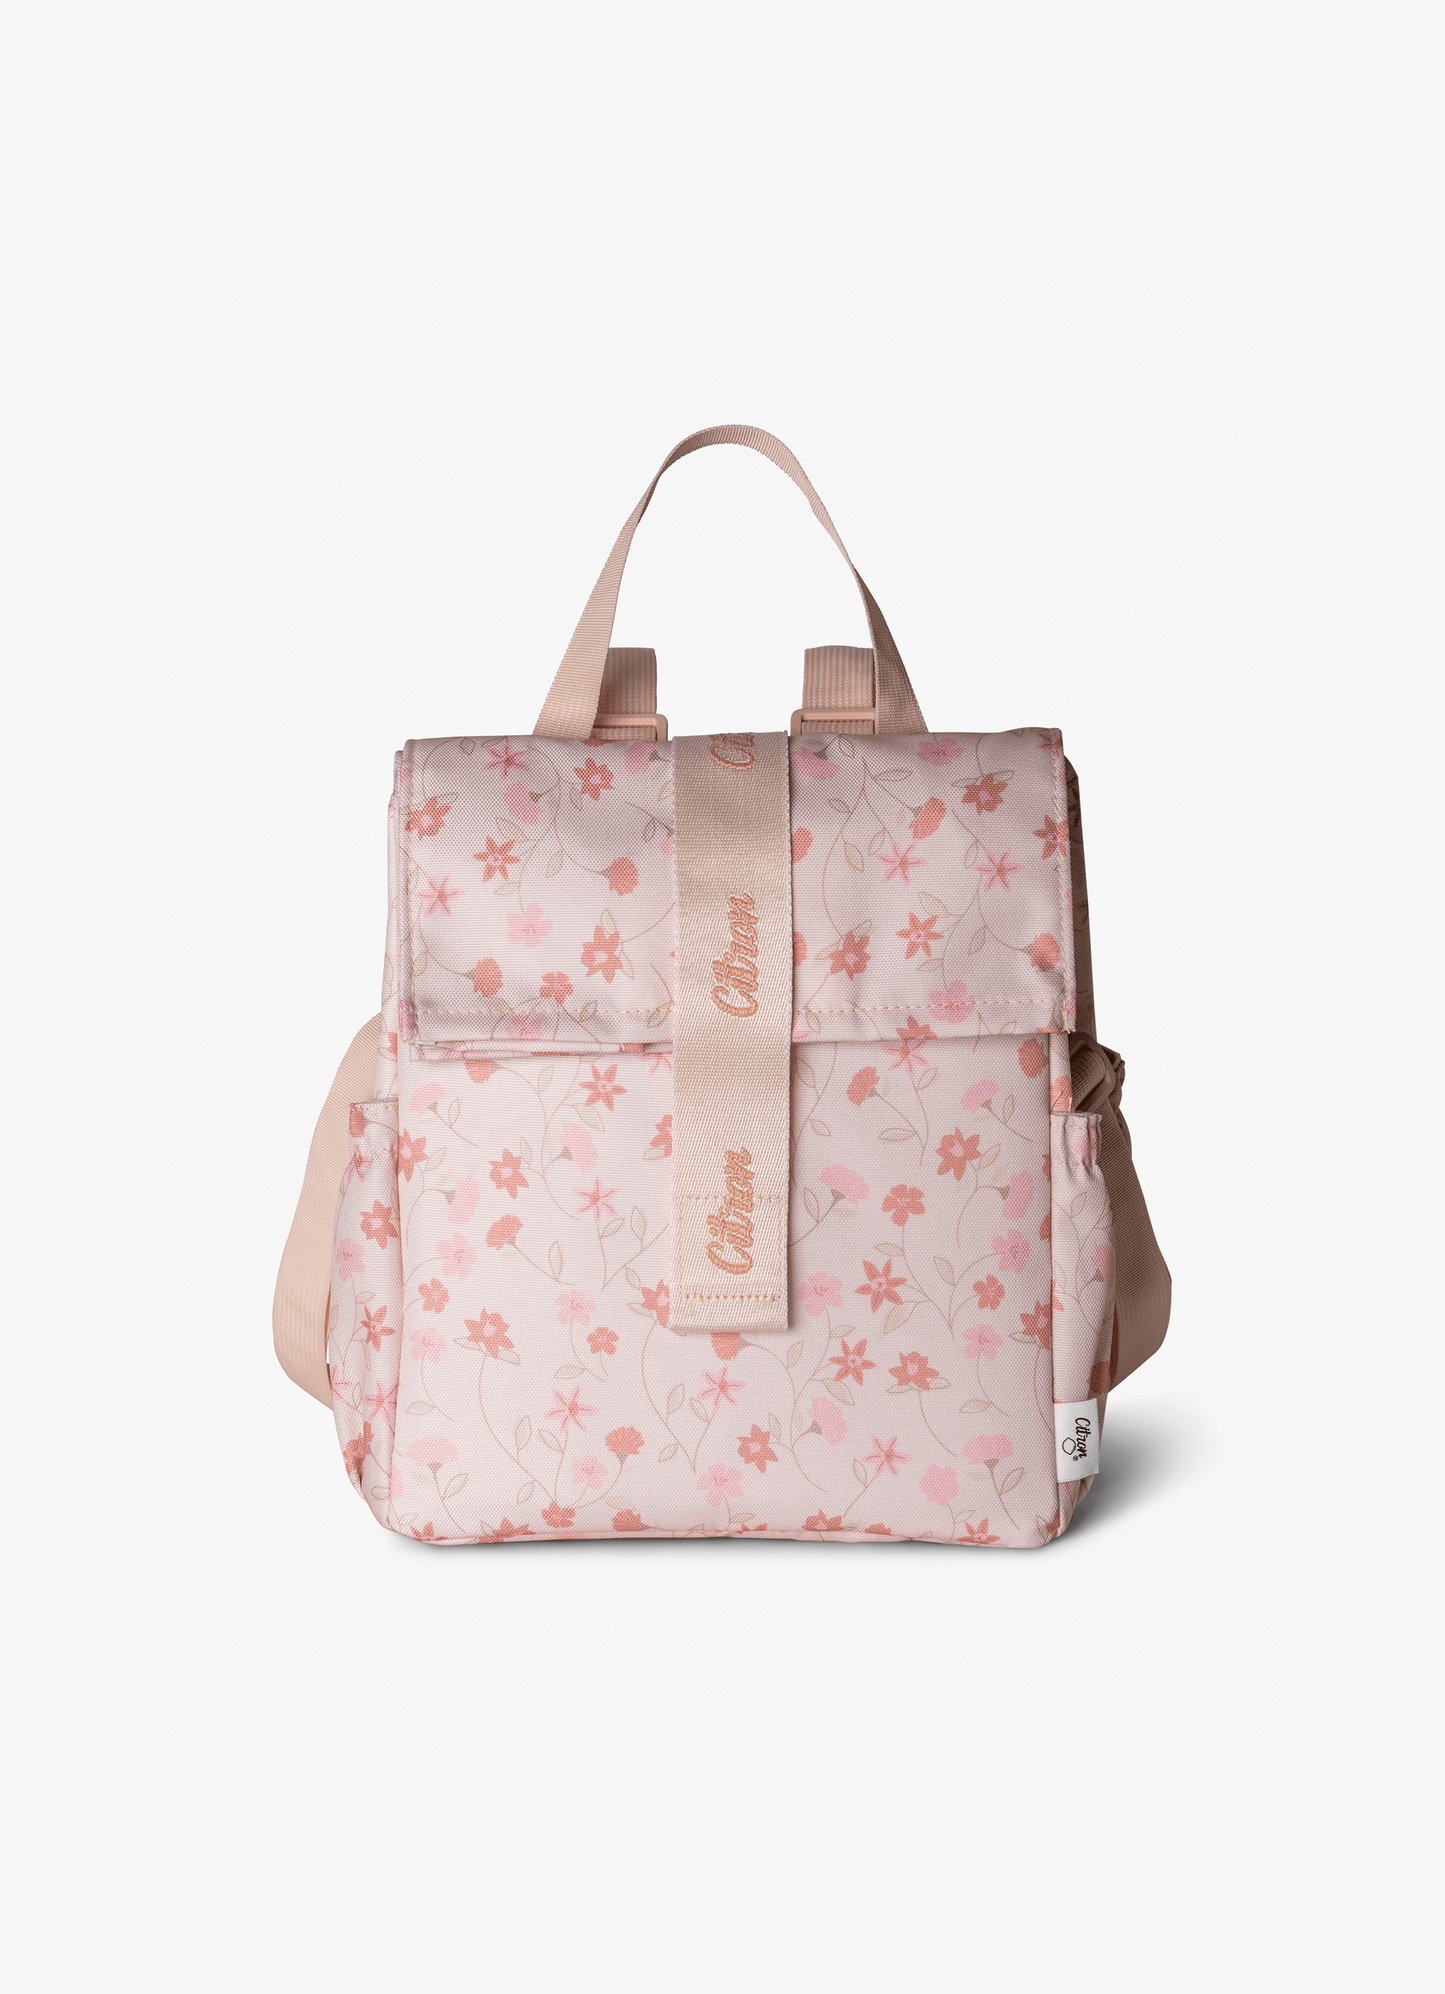 Thermal Roll-up Lunch Bag - Flowers